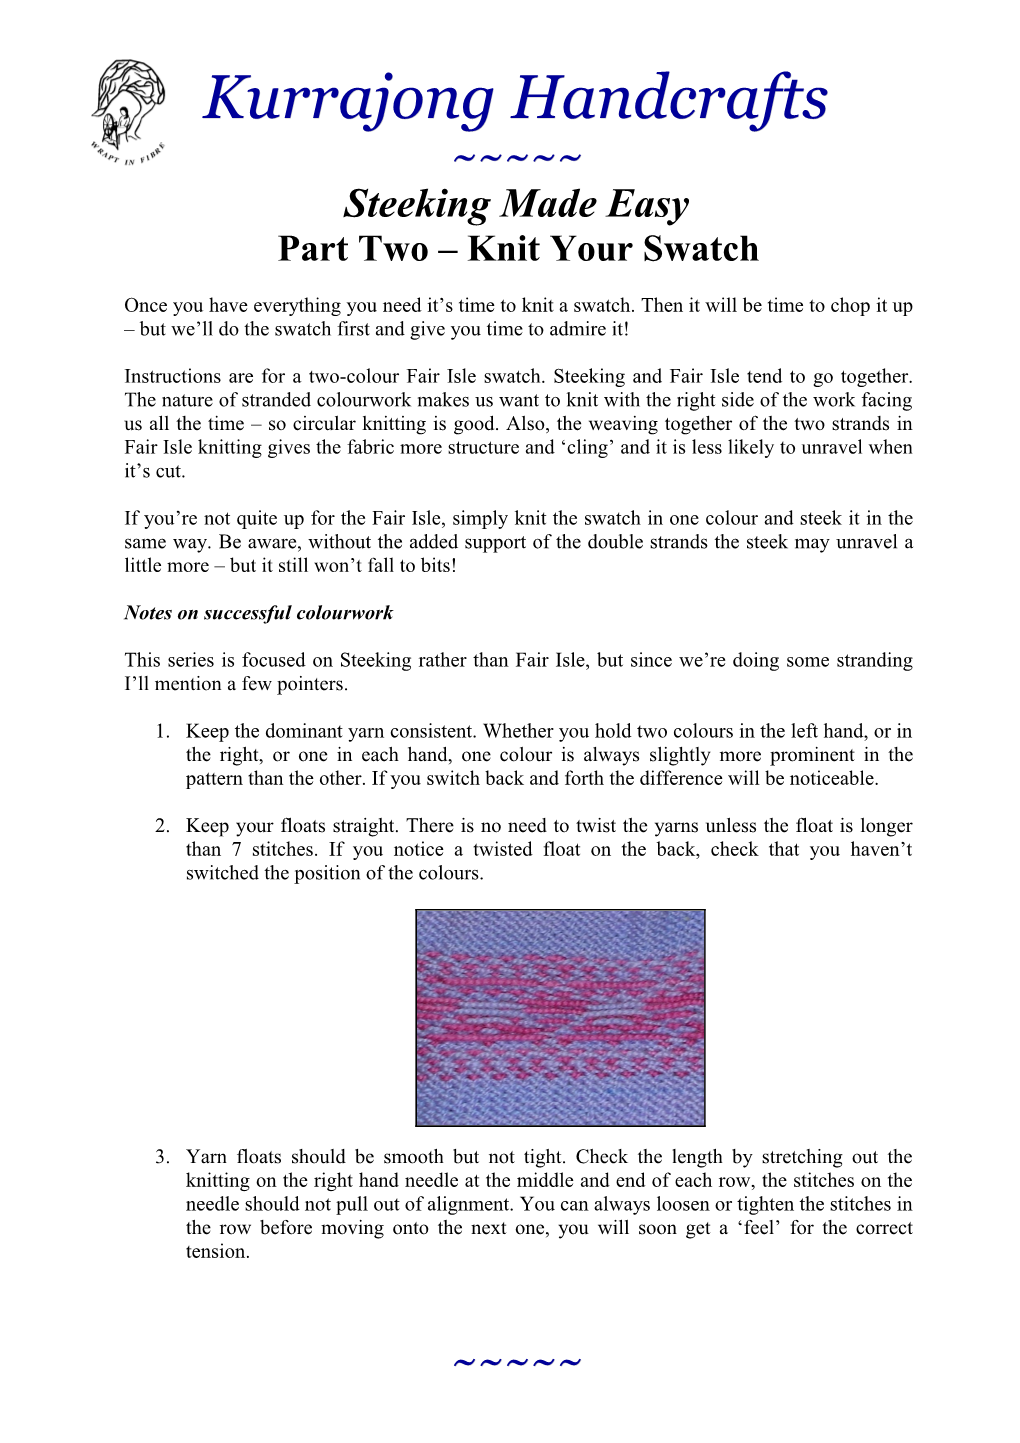 Steeking Made Easy Part Two – Knit Your Swatch